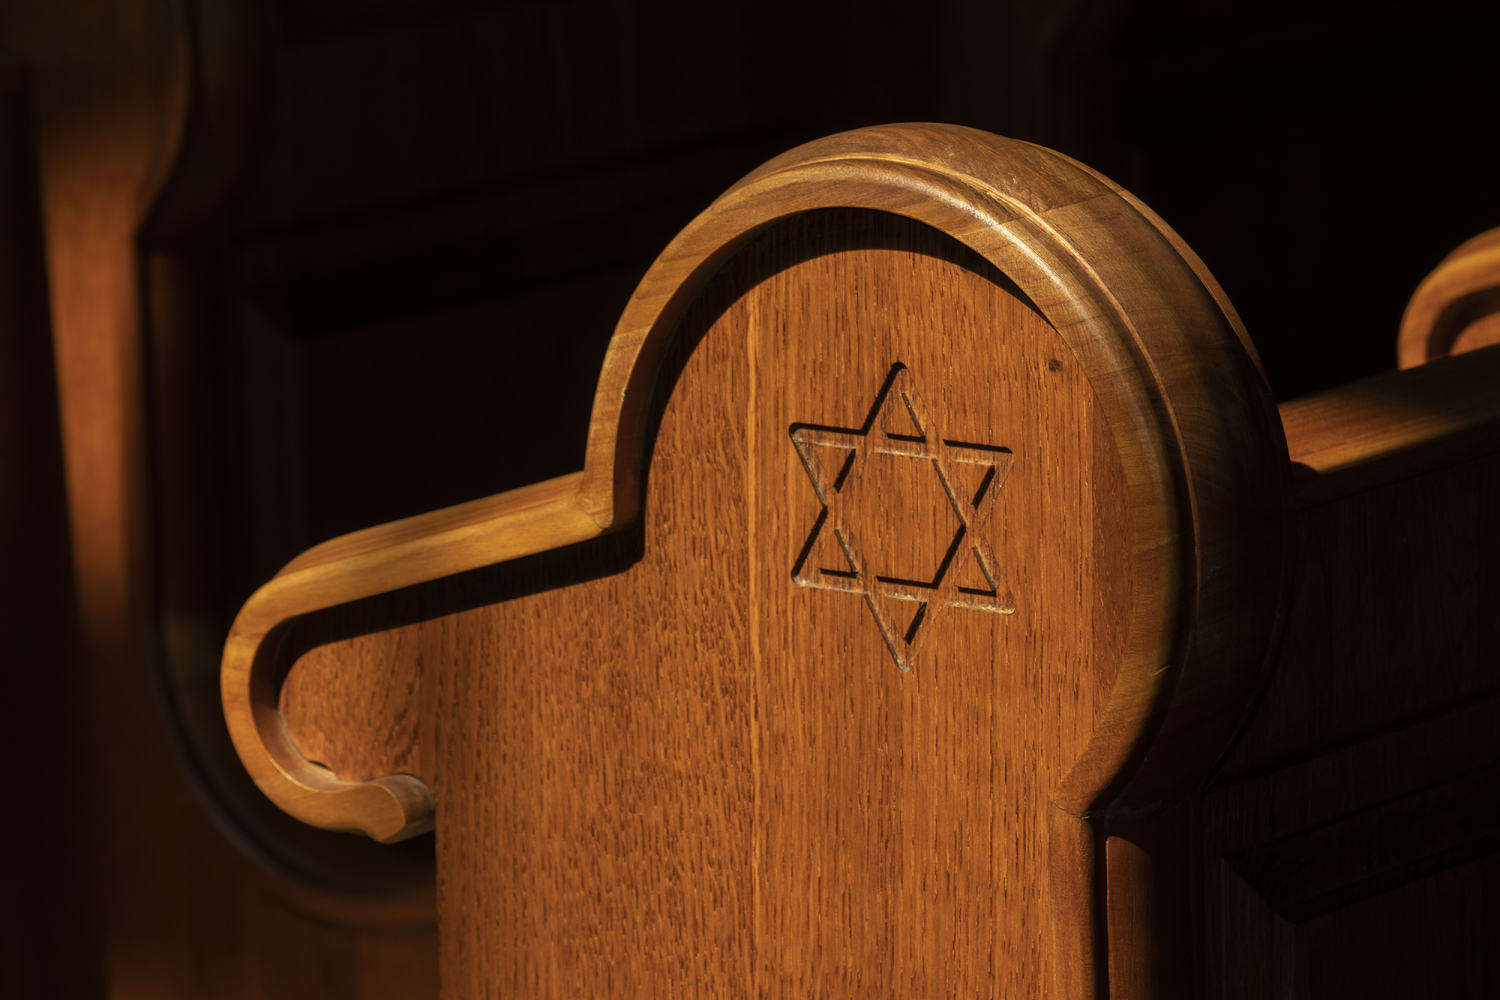 Michigan man sentenced to prison for violent threats against Jewish people